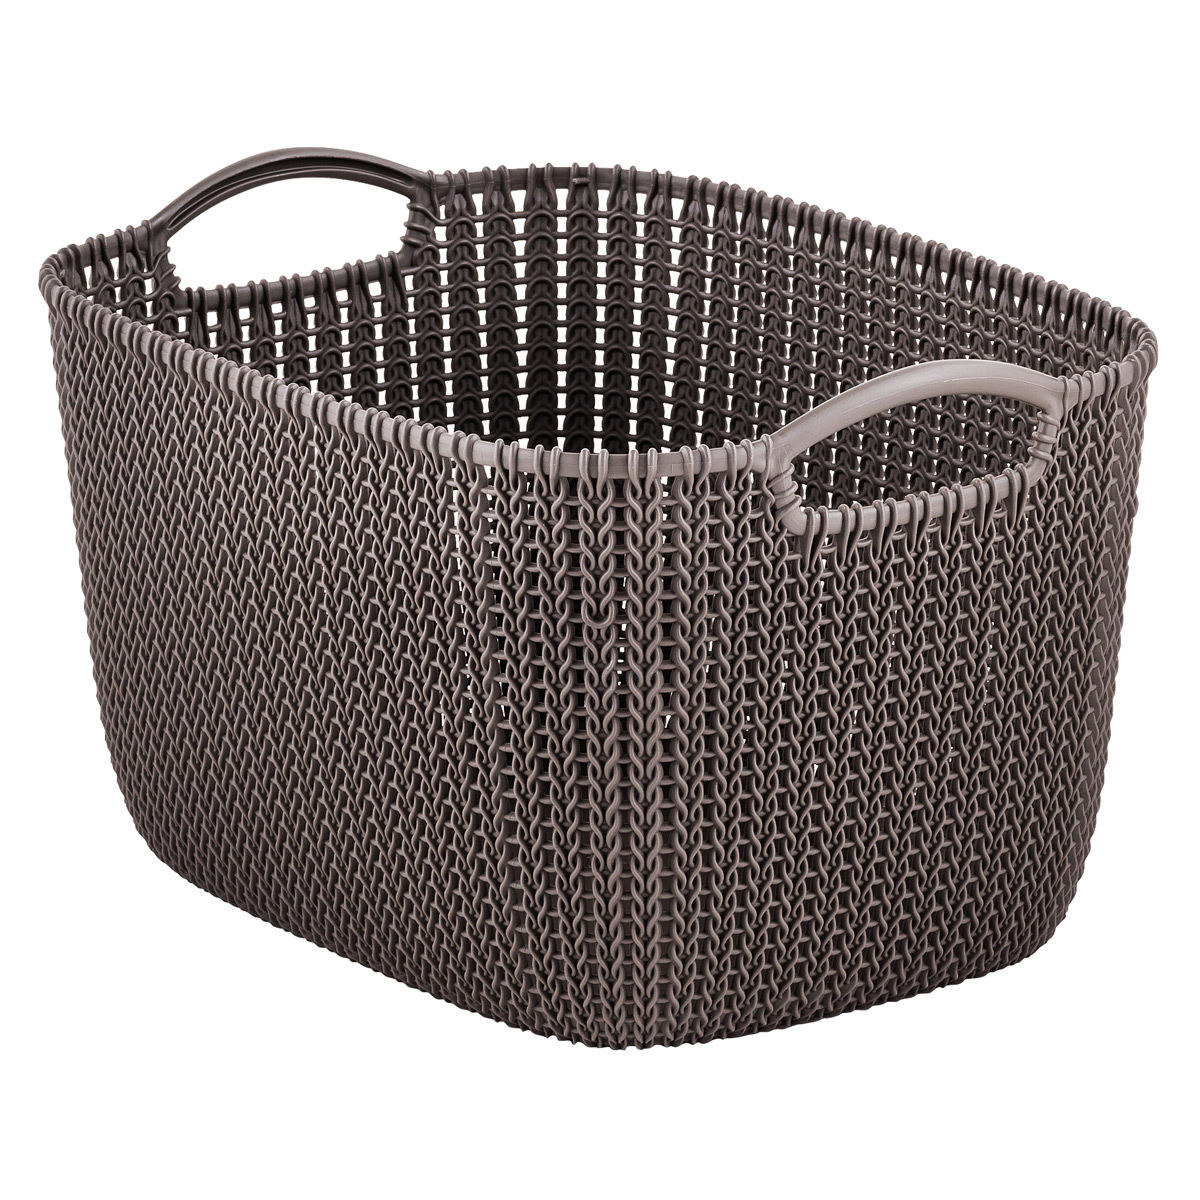 Harvest Brown Knit Baskets | The Container Store